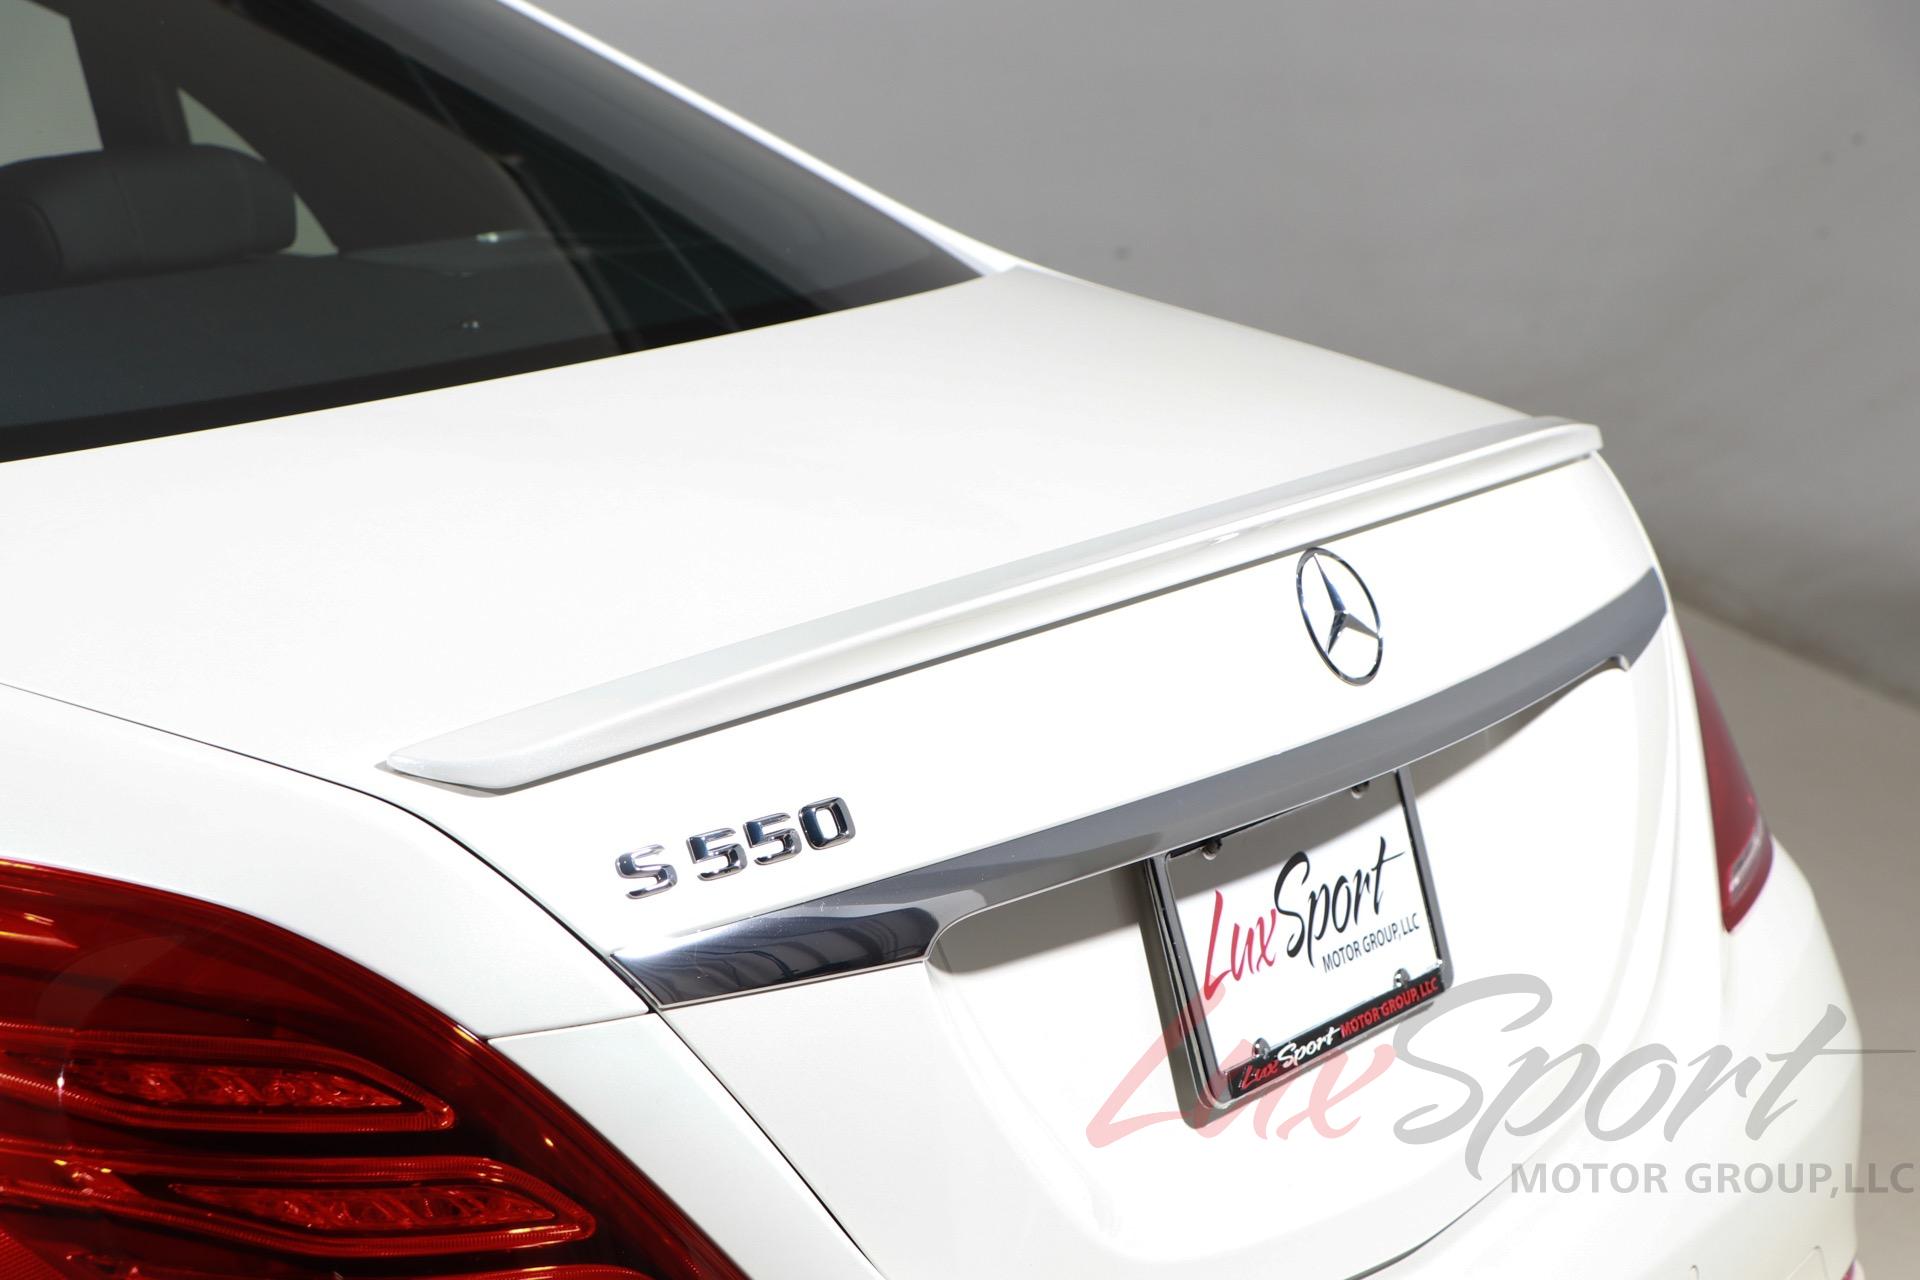 Used 2014 Mercedes-Benz S-Class S 550 | Syosset, NY